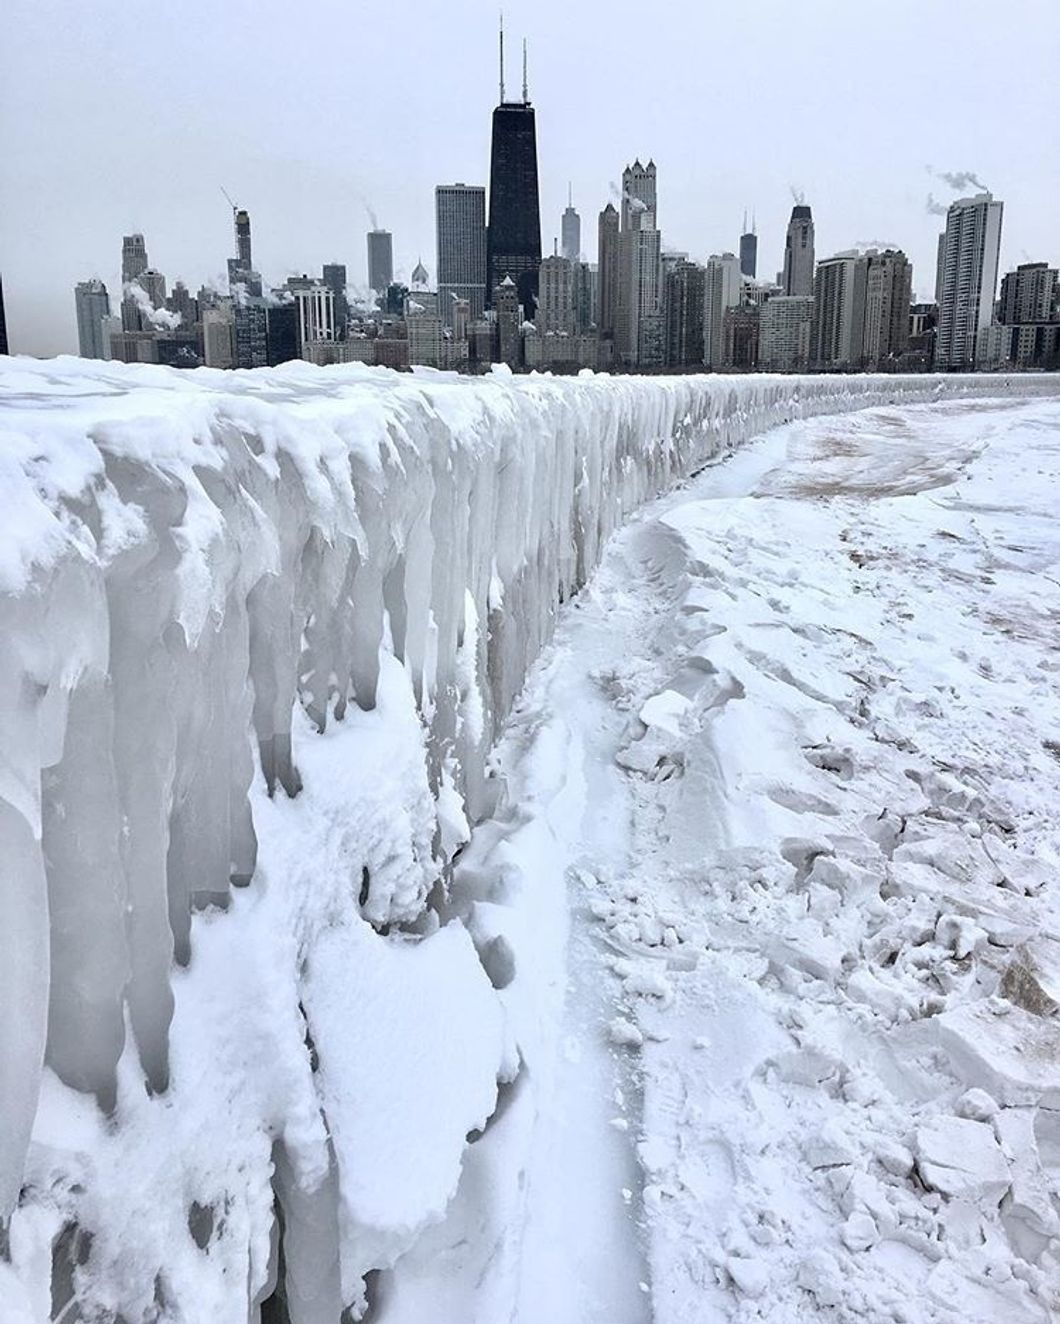 3 Things To Understand About The Recent Polar Vortex And What Climate Change Had To Do With It